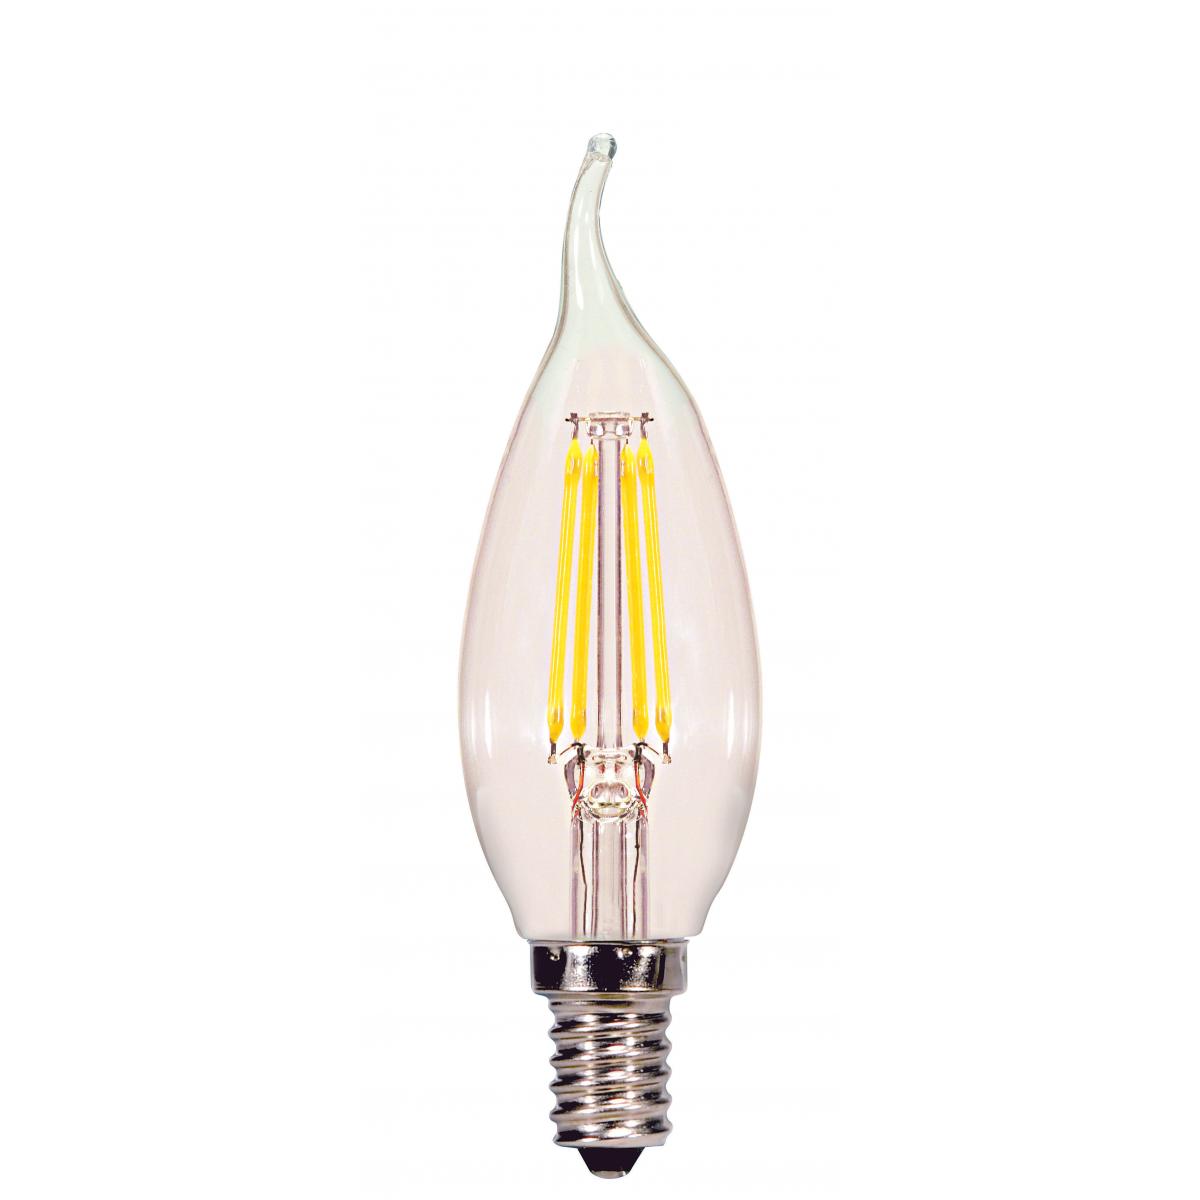 Replacement for Satco S29867 4 Watt CA11 LED Clear Candelabra base 5000K 350 Lumens 120 Volt - NOW S21299